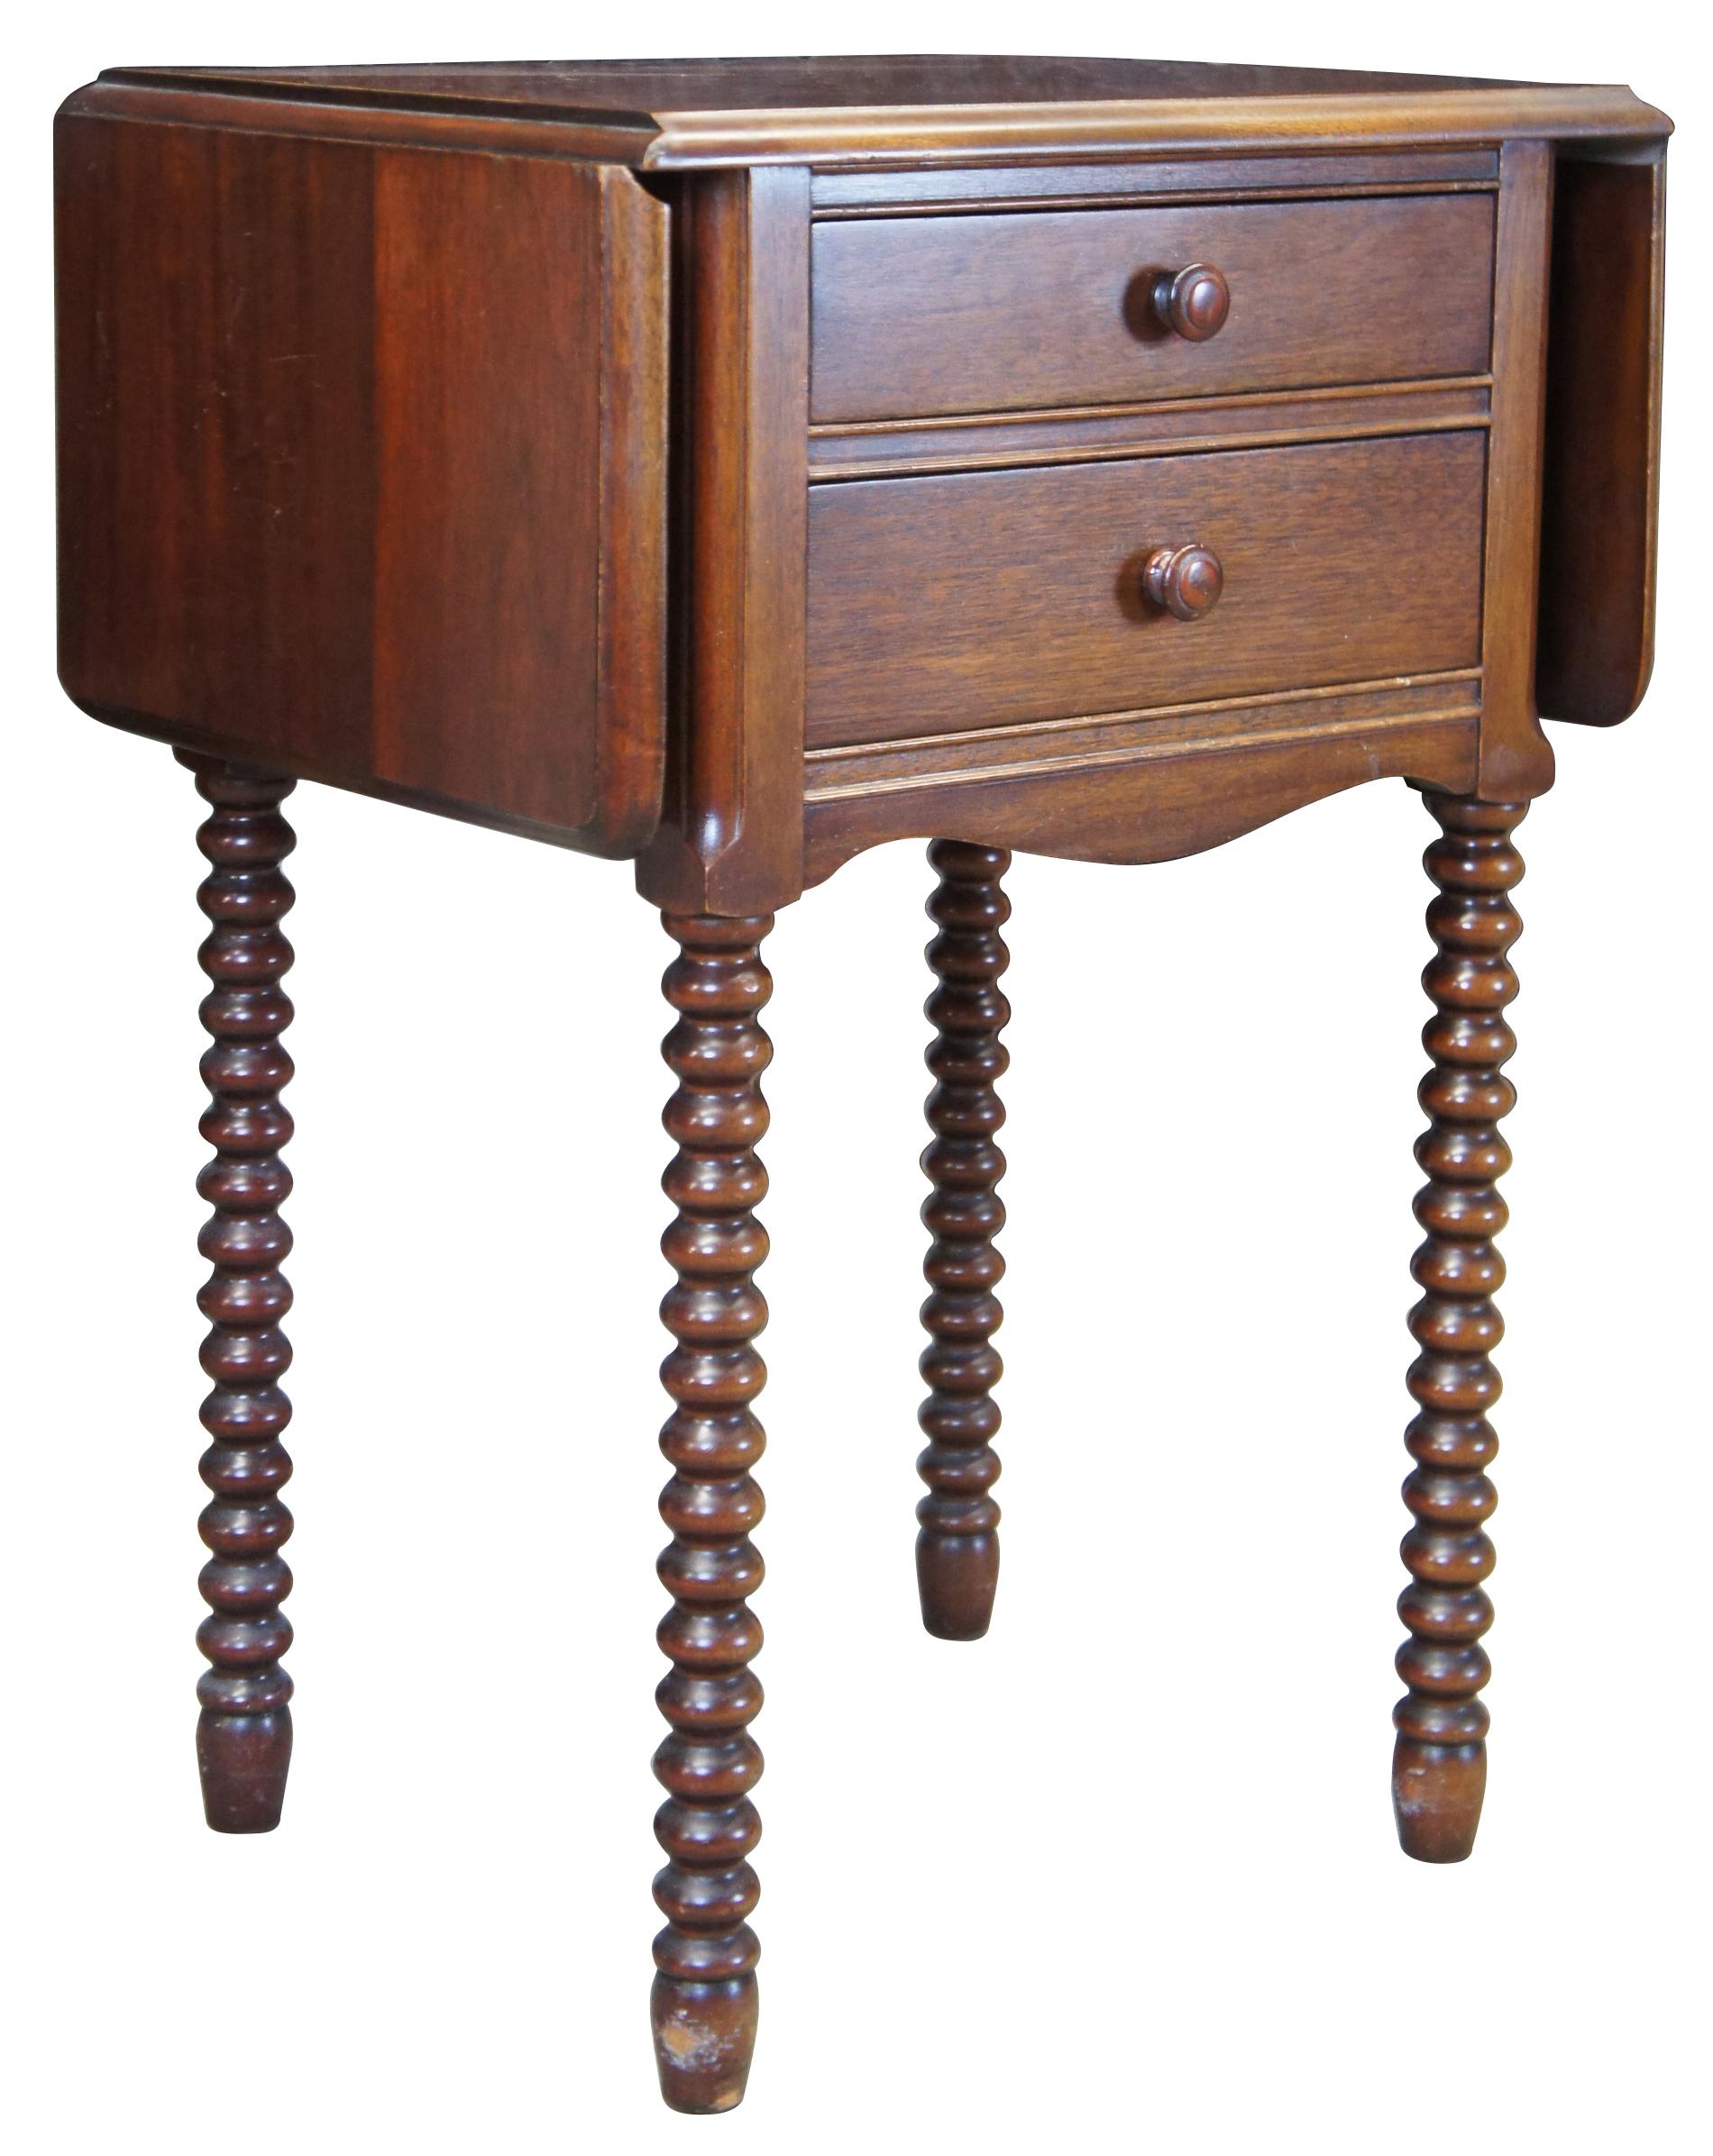 Mid-20th century Early American style dropleaf side table. Made from mahogany with a cherry stain. Features two drawers and long ribbed / spool legs.
    
Leaves add 10